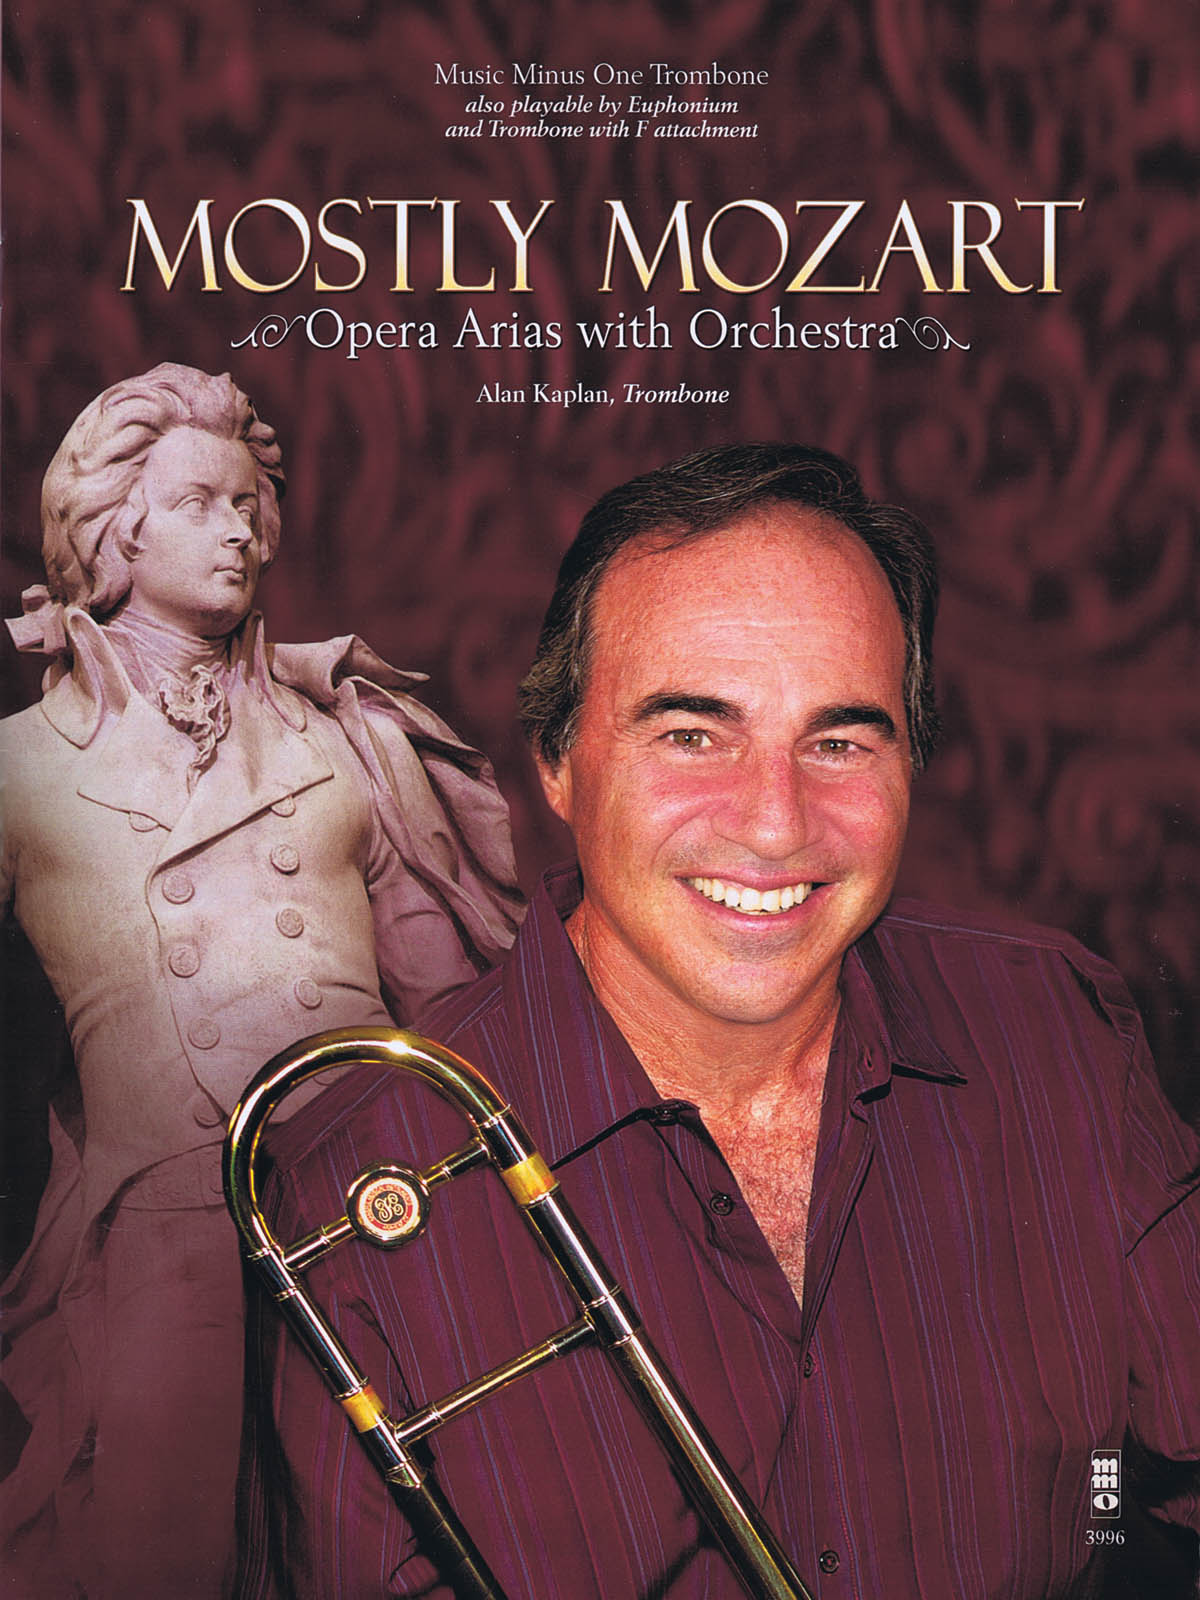 Wolfgang Amadeus Mozart: Mostly Mozart Operatic Arias with Orchestra: Trombone